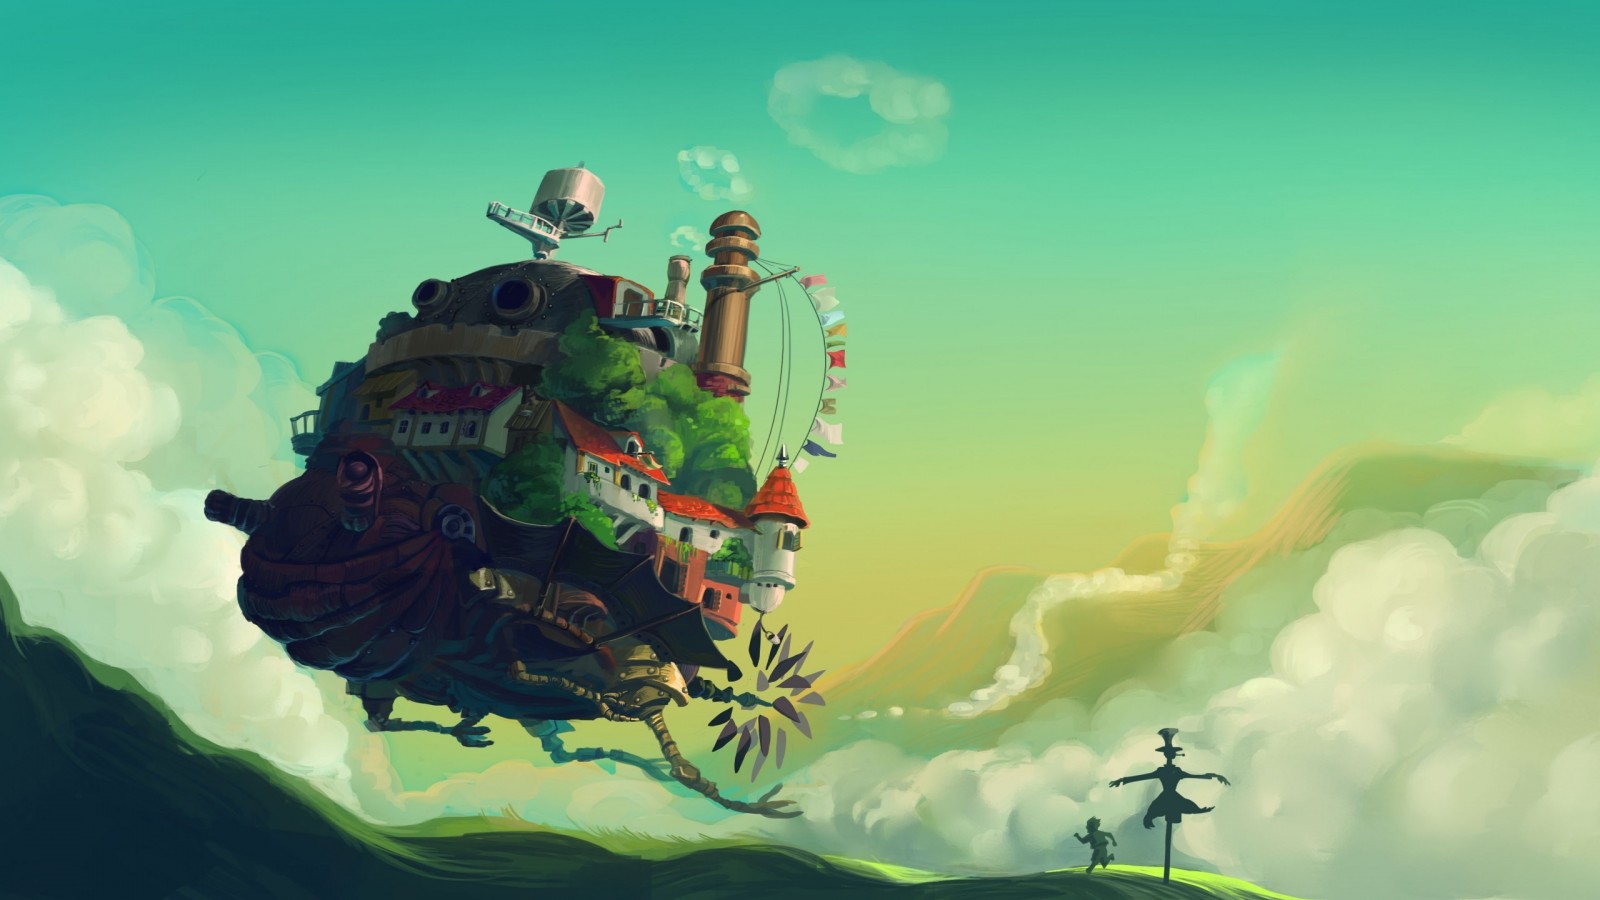 illustration, anime, Studio Ghibli, Howls Moving Castle, Terrain, screenshot, computer wallpaper, atmosphere of earth, extreme sport High quality walls